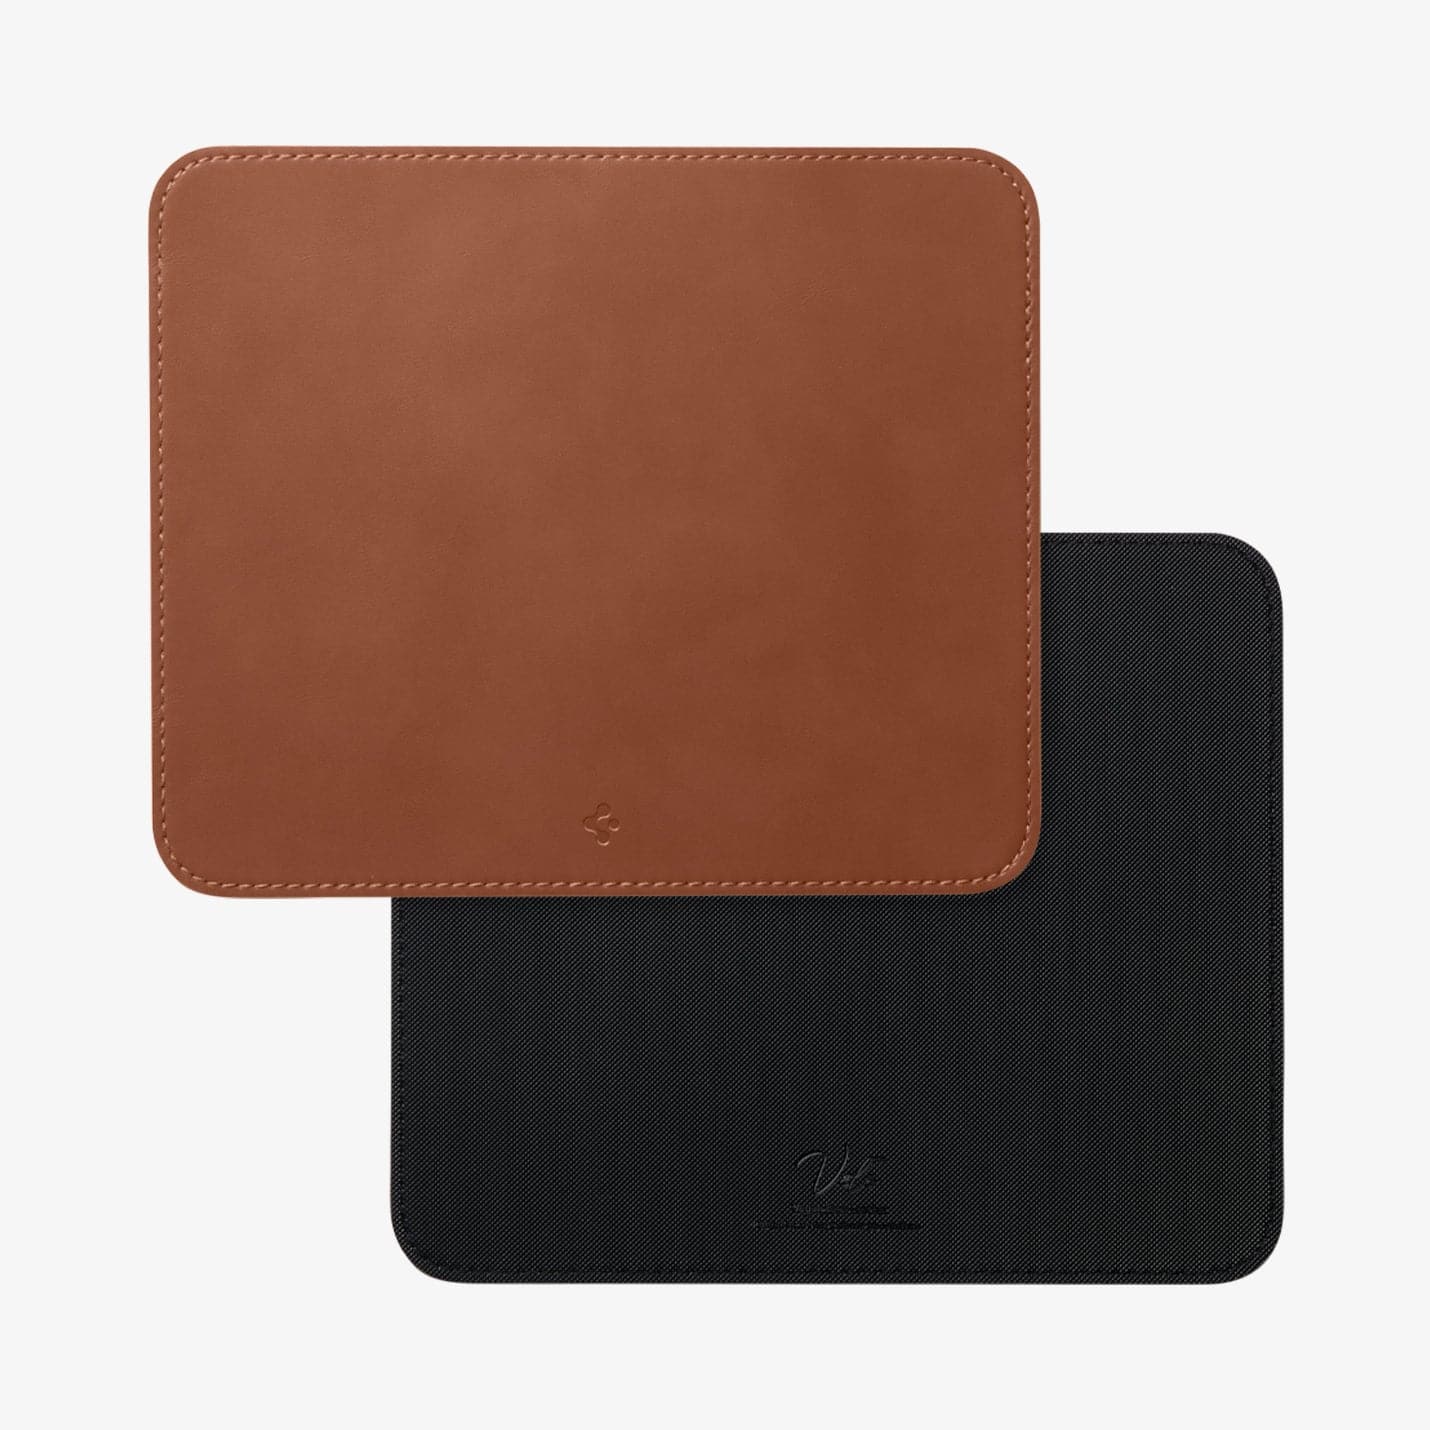 APP04761 - LD301 Mousepad in brown showing the front and back